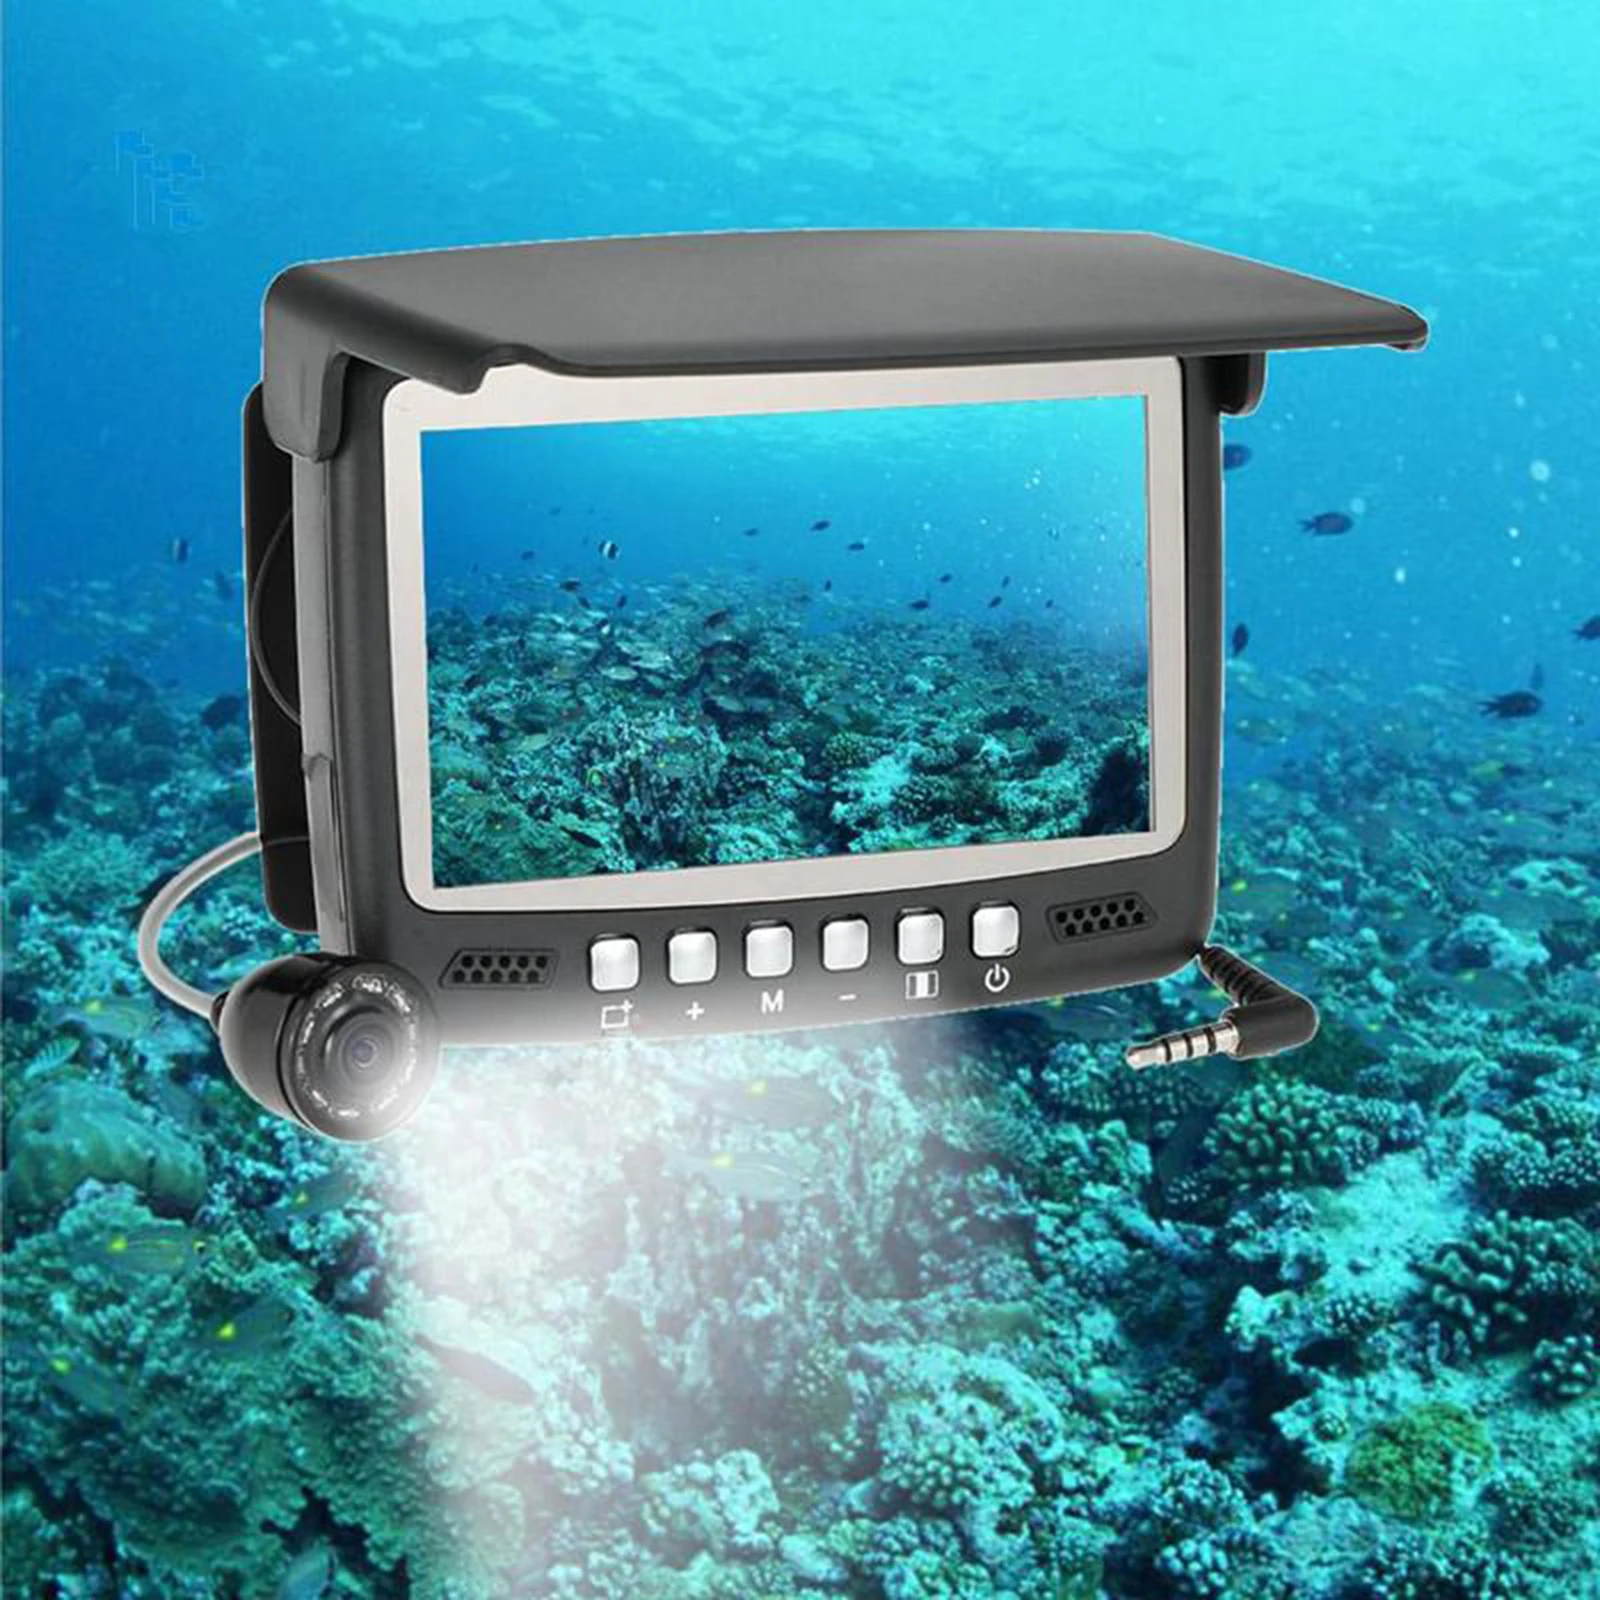 Underwater Fishing Camera DVR Fish Finder Infrared LED Fishing Video Camera with 4.3 inch Monitor for Kayak Boat Sea Fishing